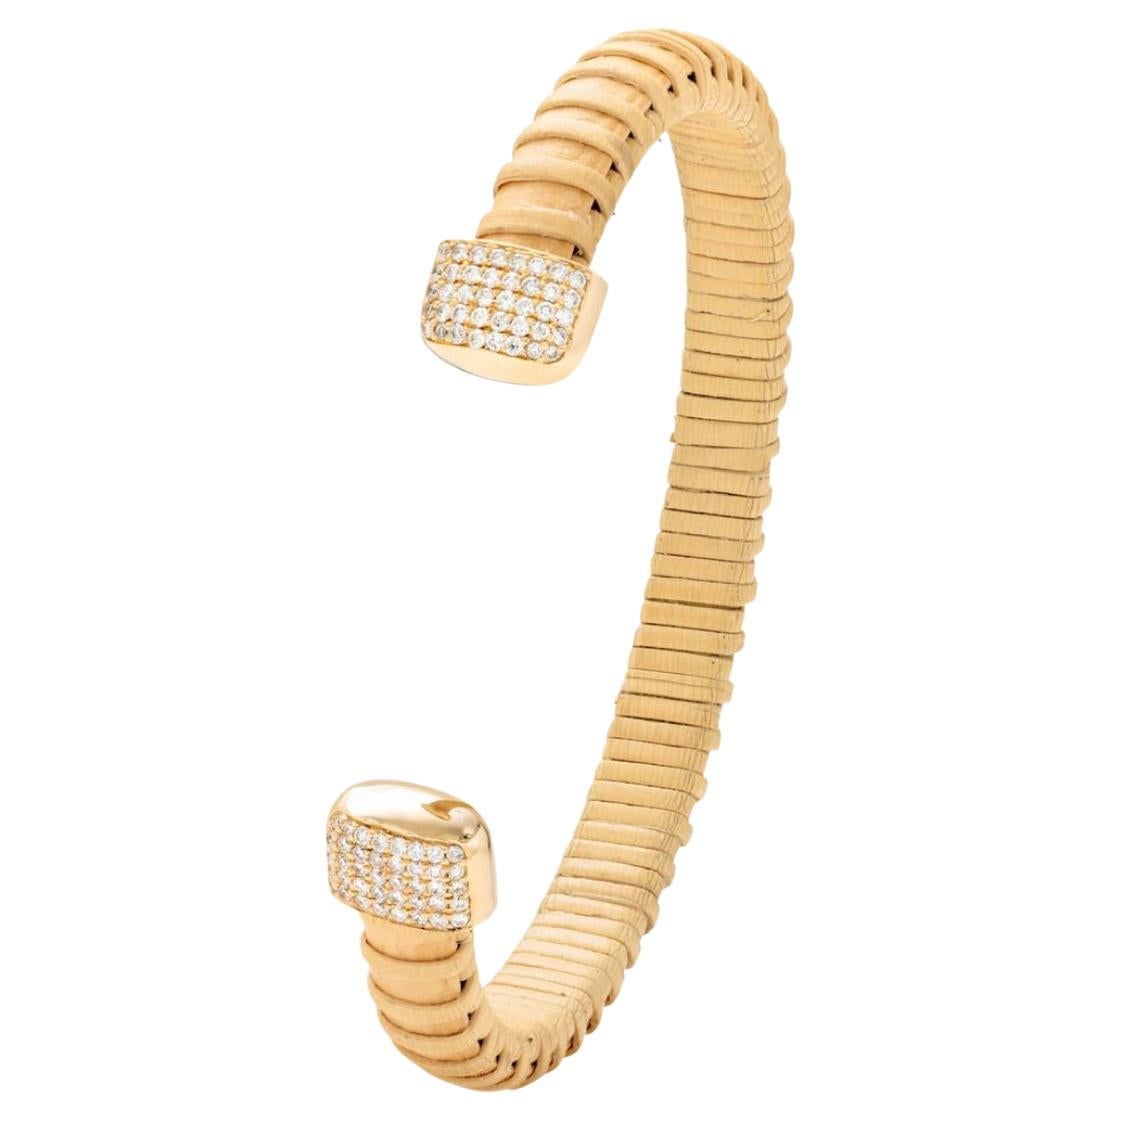 Paris & Lily Nantucket Lightship Basket Cuff with Yellow Gold and Diamonds For Sale